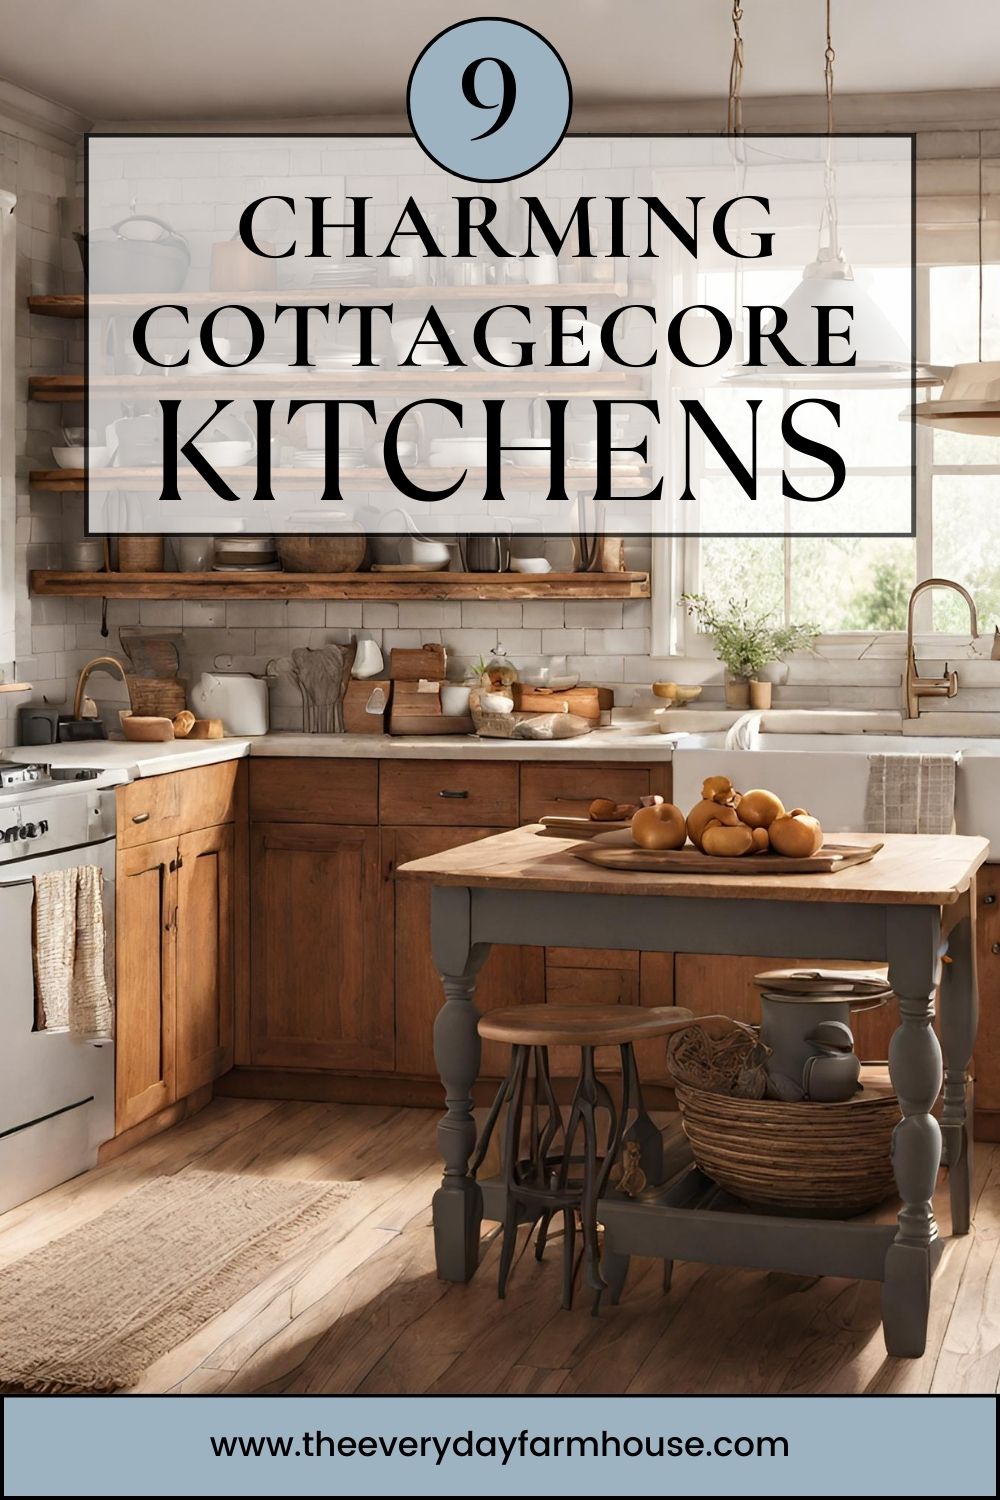 Cottagecore Kitchen: A Collection of Whimsical Charm